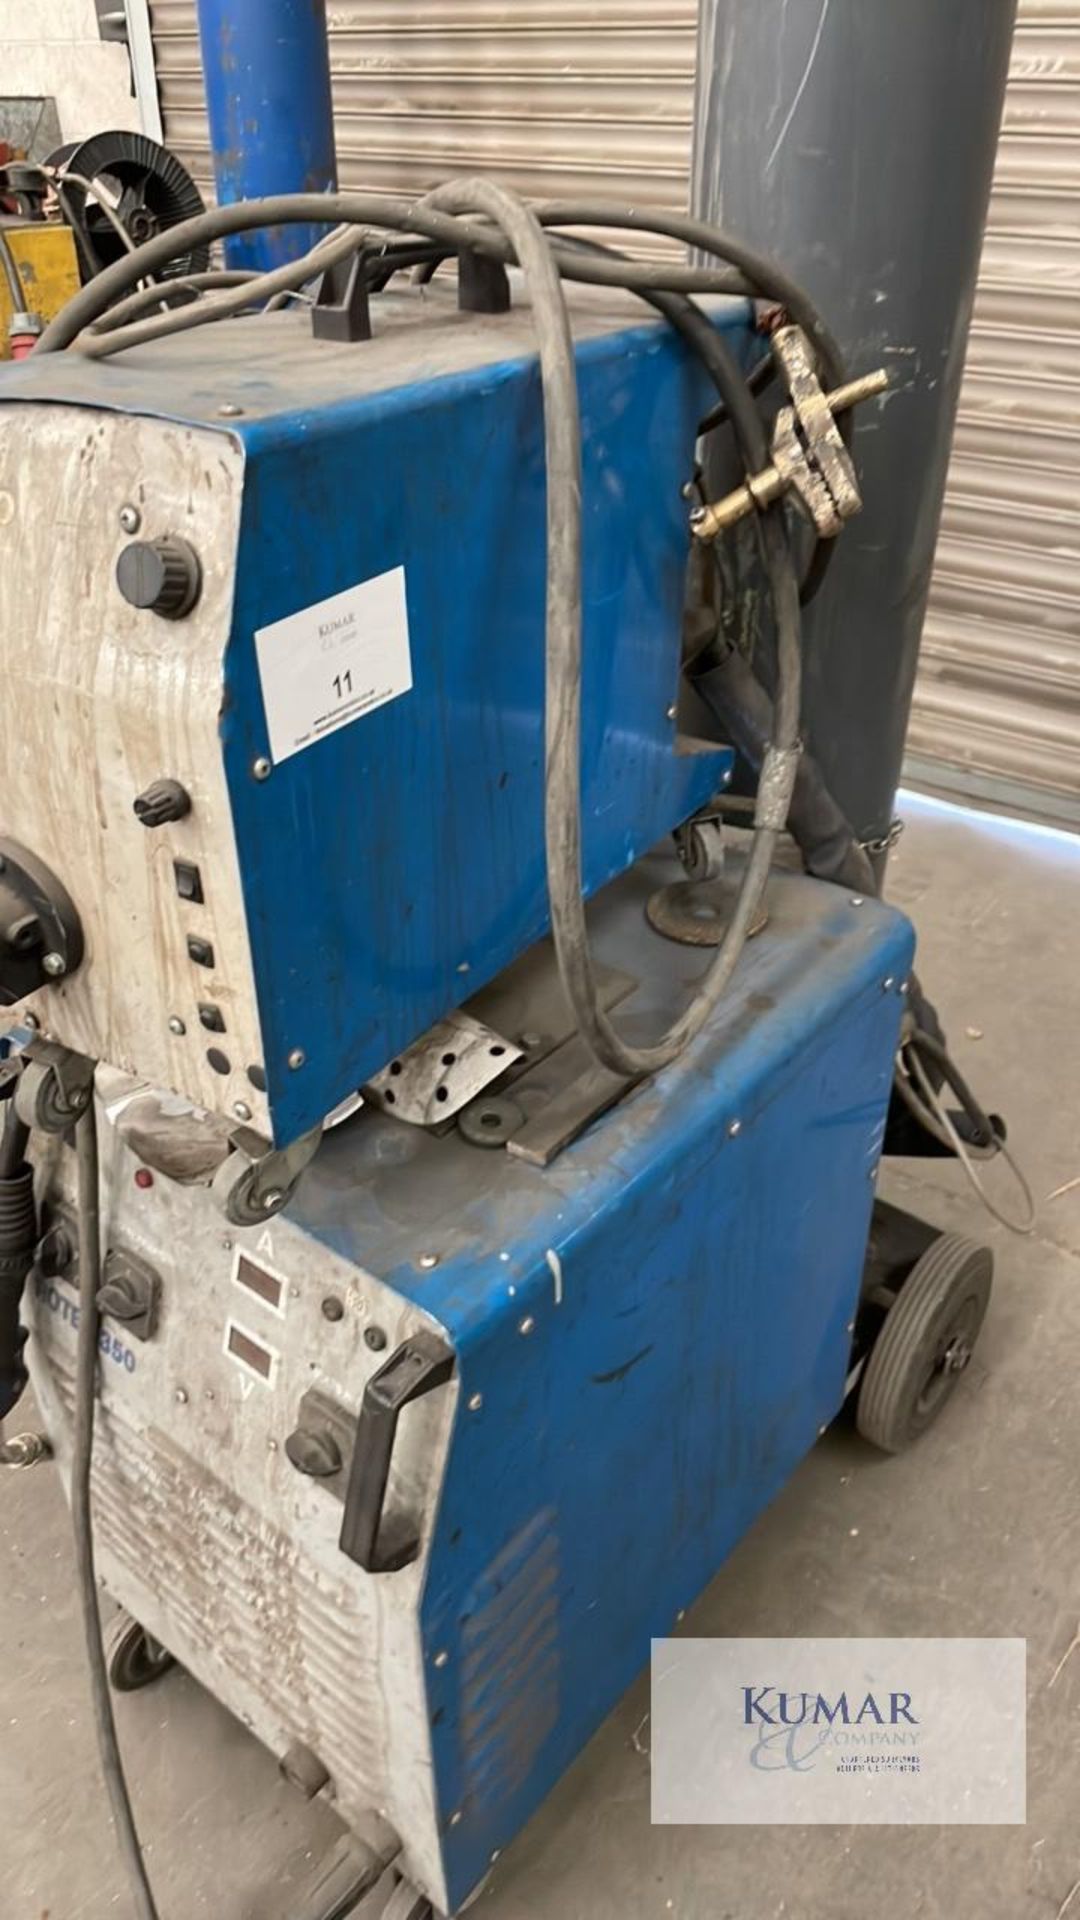 Rotec 350 Mig welder with Wire Feed - Image 2 of 5